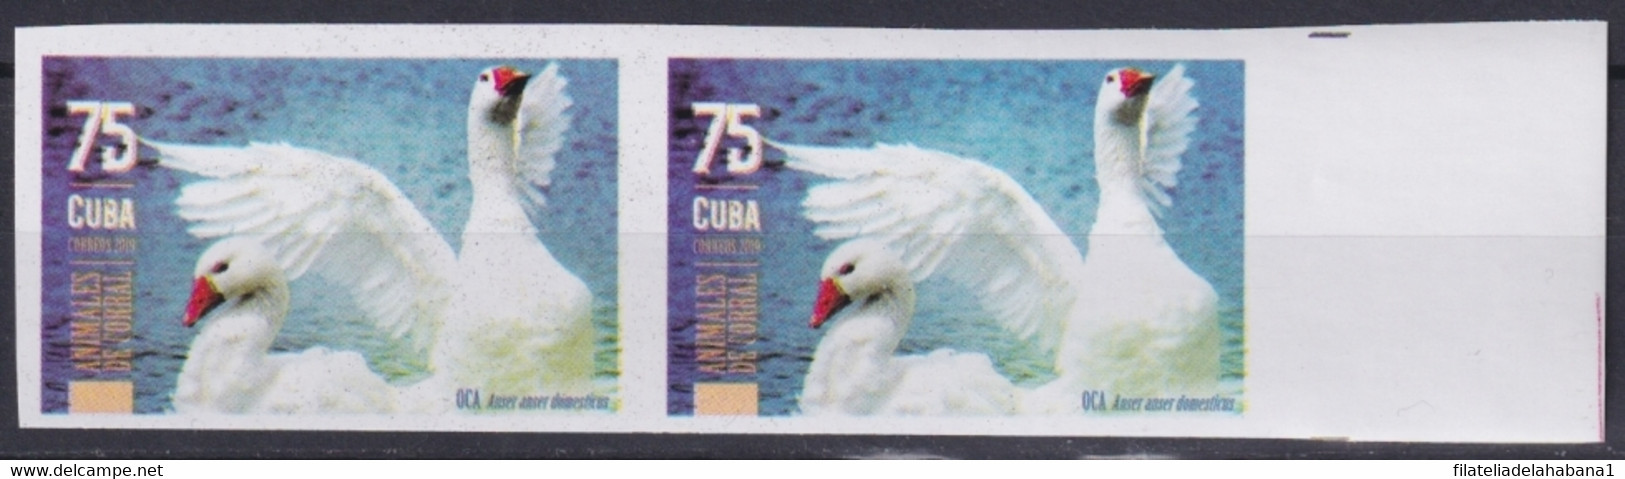 2019.193 CUBA MNH 2019 IMPERFORATED PROOF 90c ANIMALES DE CORRAL BIRD CISNE AVES. - Imperforates, Proofs & Errors